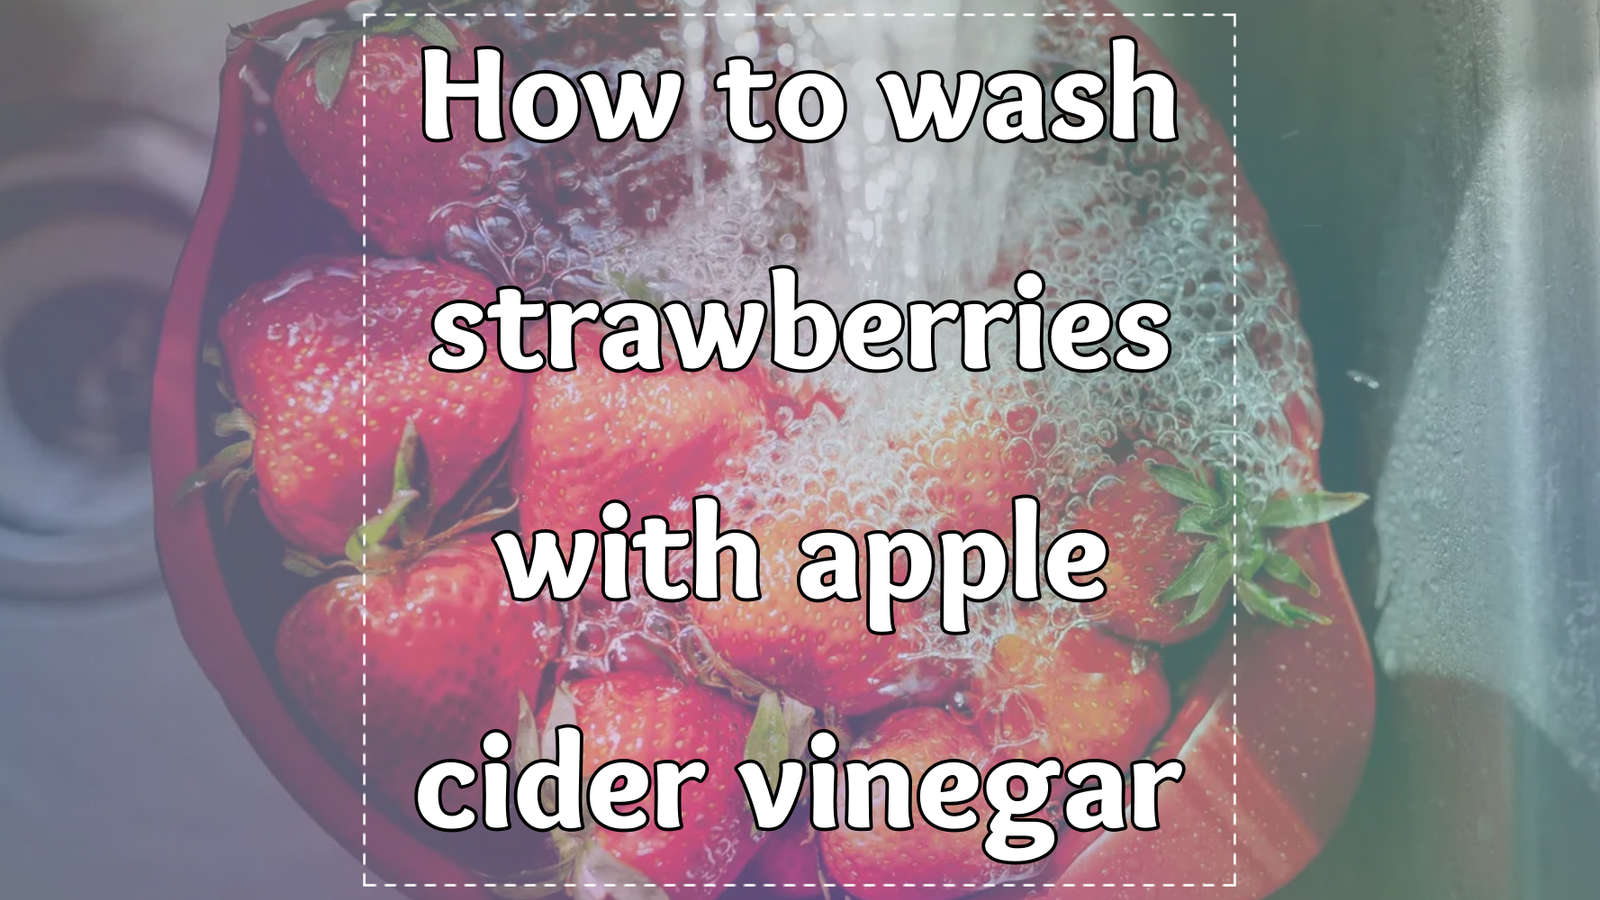 How to wash strawberries with apple cider vinegar